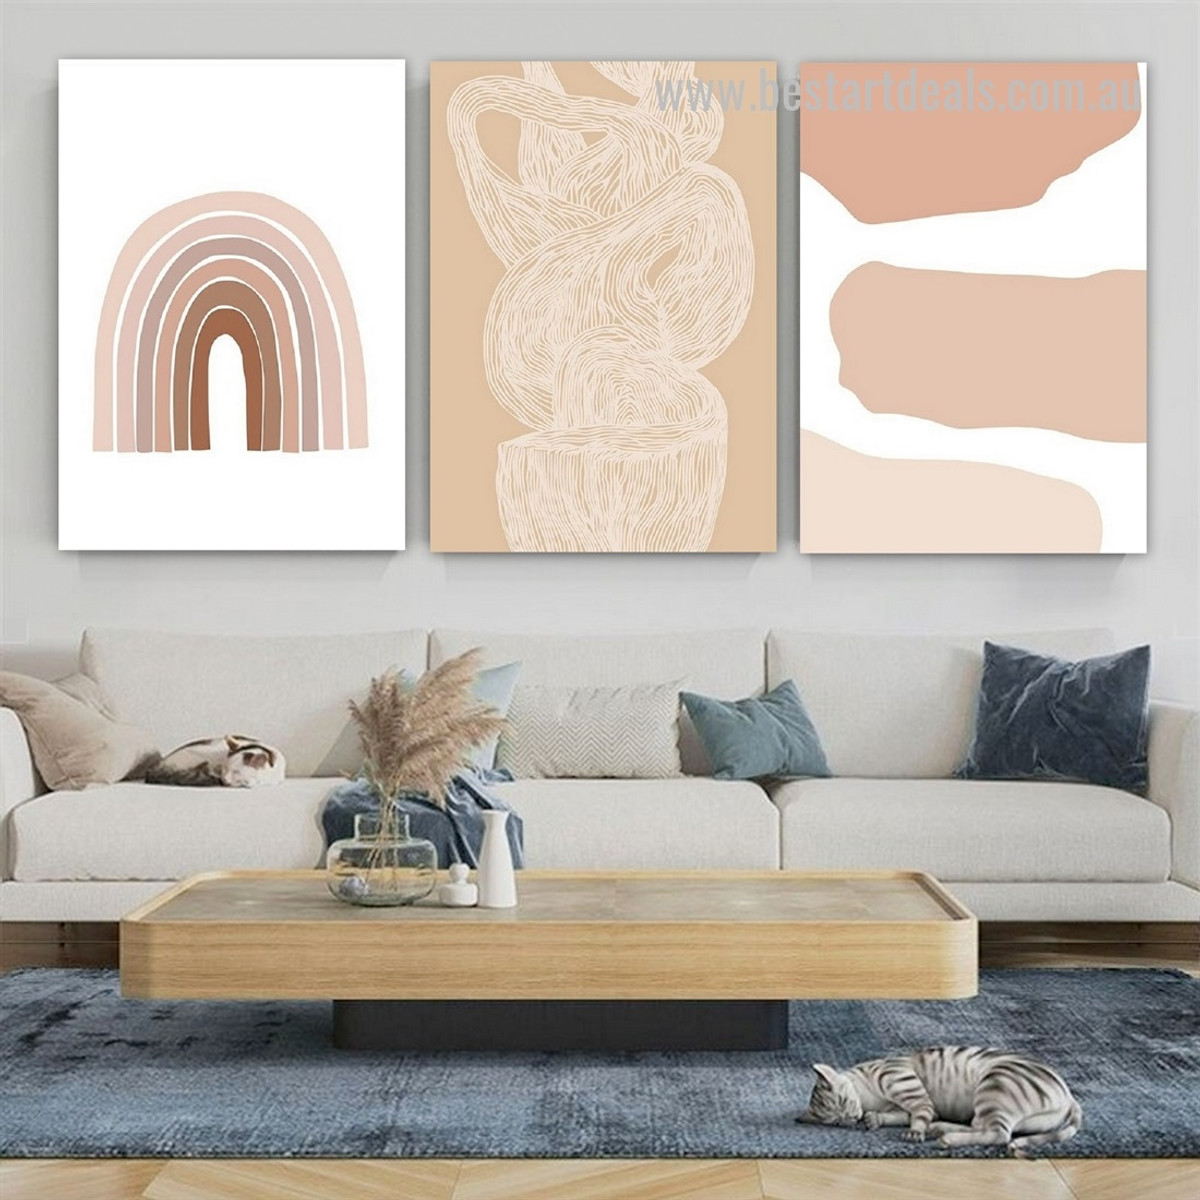 Convoluted Splotches Lines Scandinavian Abstract 3 Piece Framed Stretched Geometric Painting Photograph Canvas Print for Room Wall Embellishment